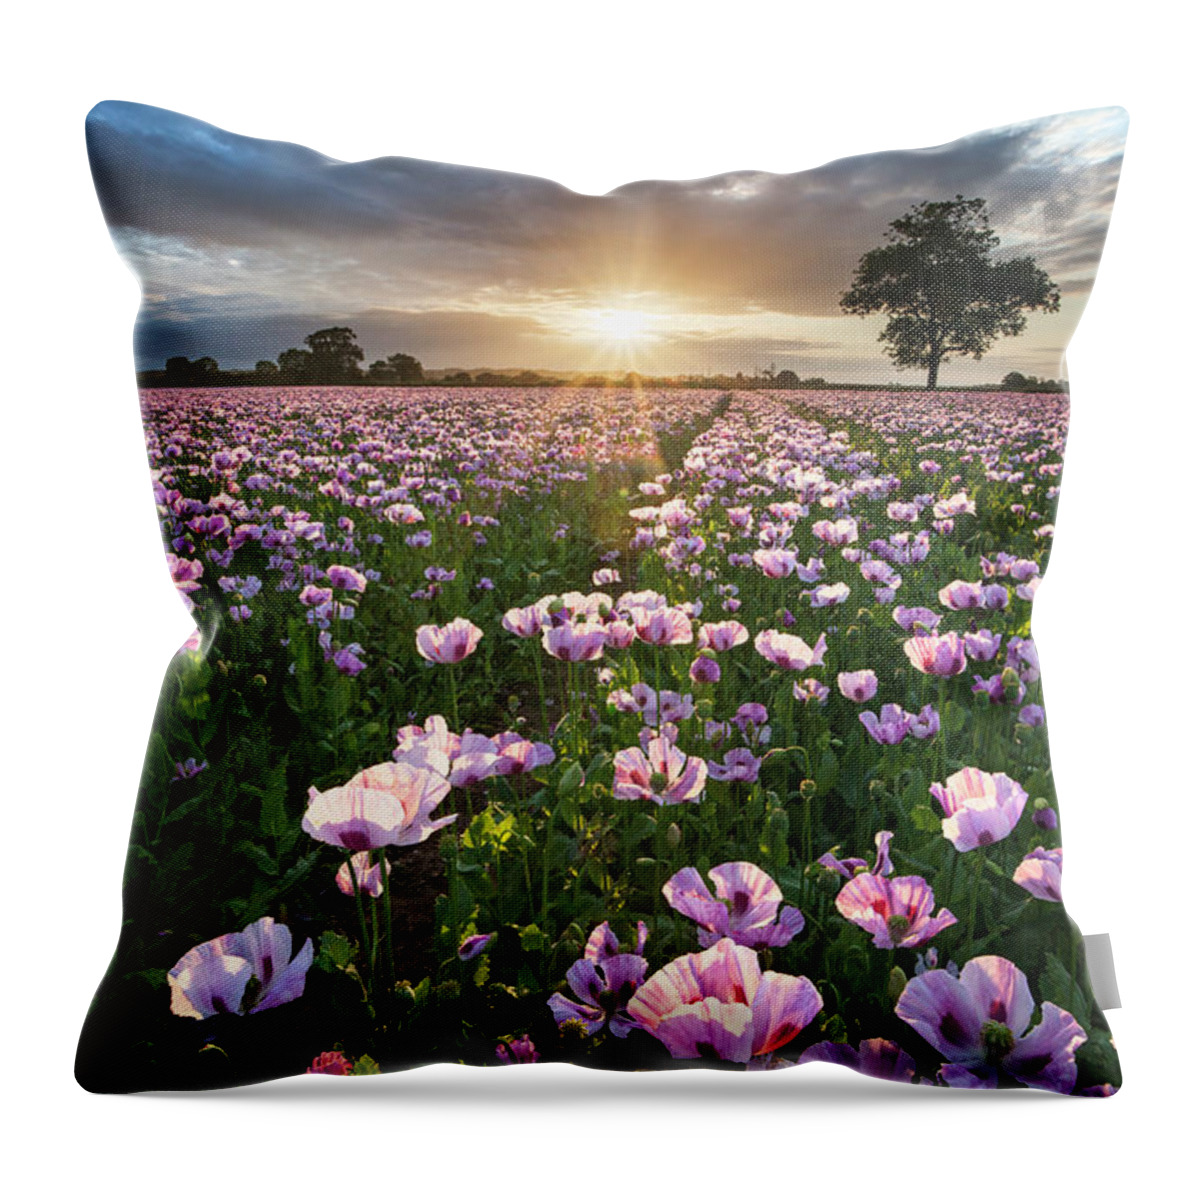 Scenics Throw Pillow featuring the photograph Opium Poppies by Simon J Byrne